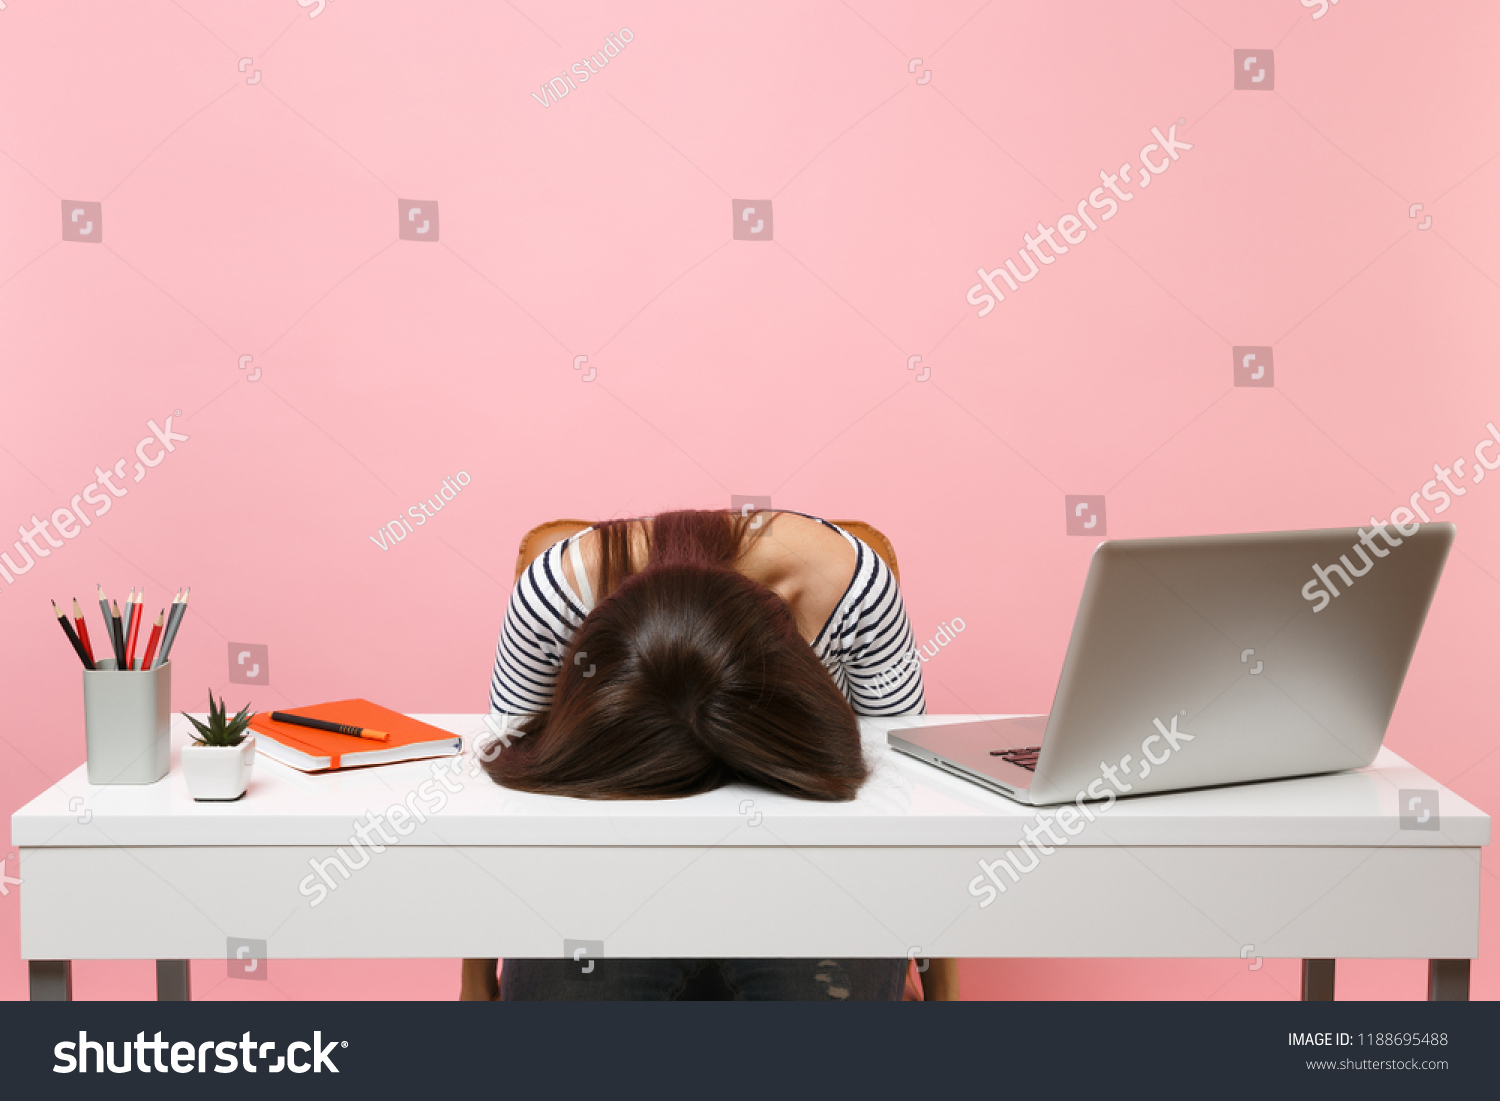 Young frustrated exhausted woman laid her head down on the table sit work at white desk with contemporary pc laptop isolated on pastel pink background. Achievement business career concept. Copy space #1188695488